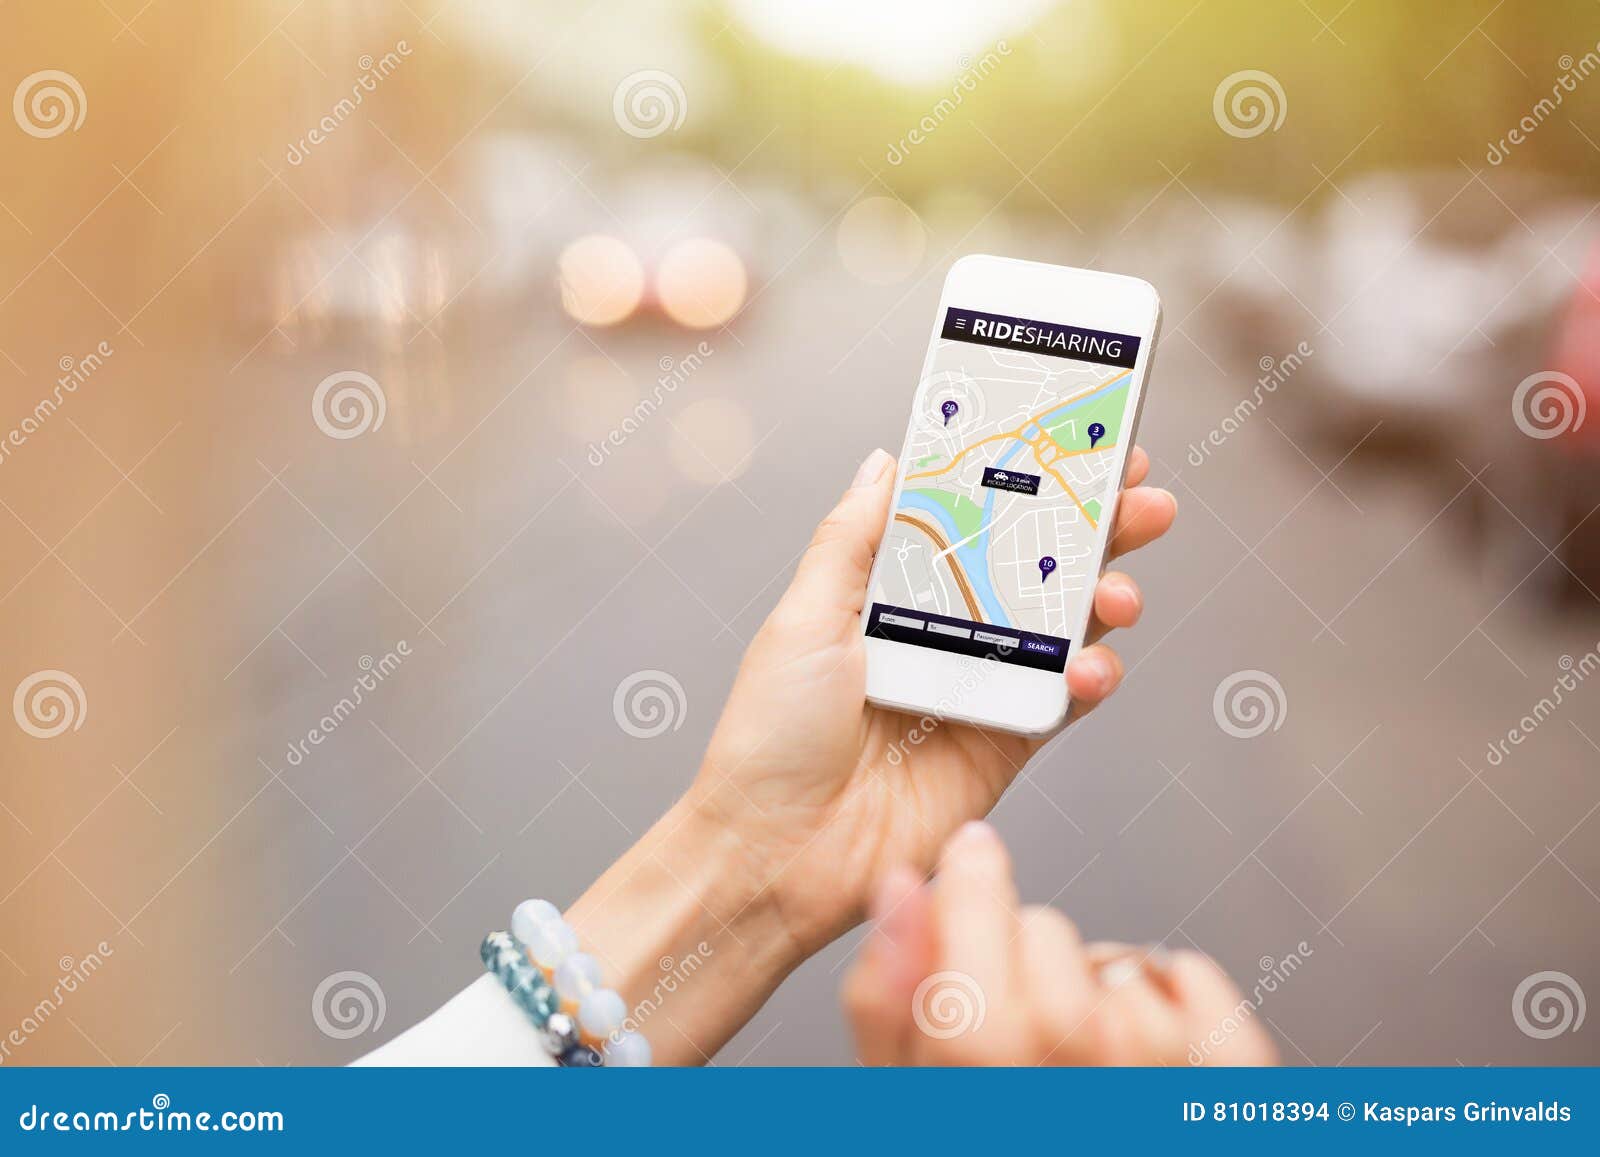 ride sharing app on mobile phone